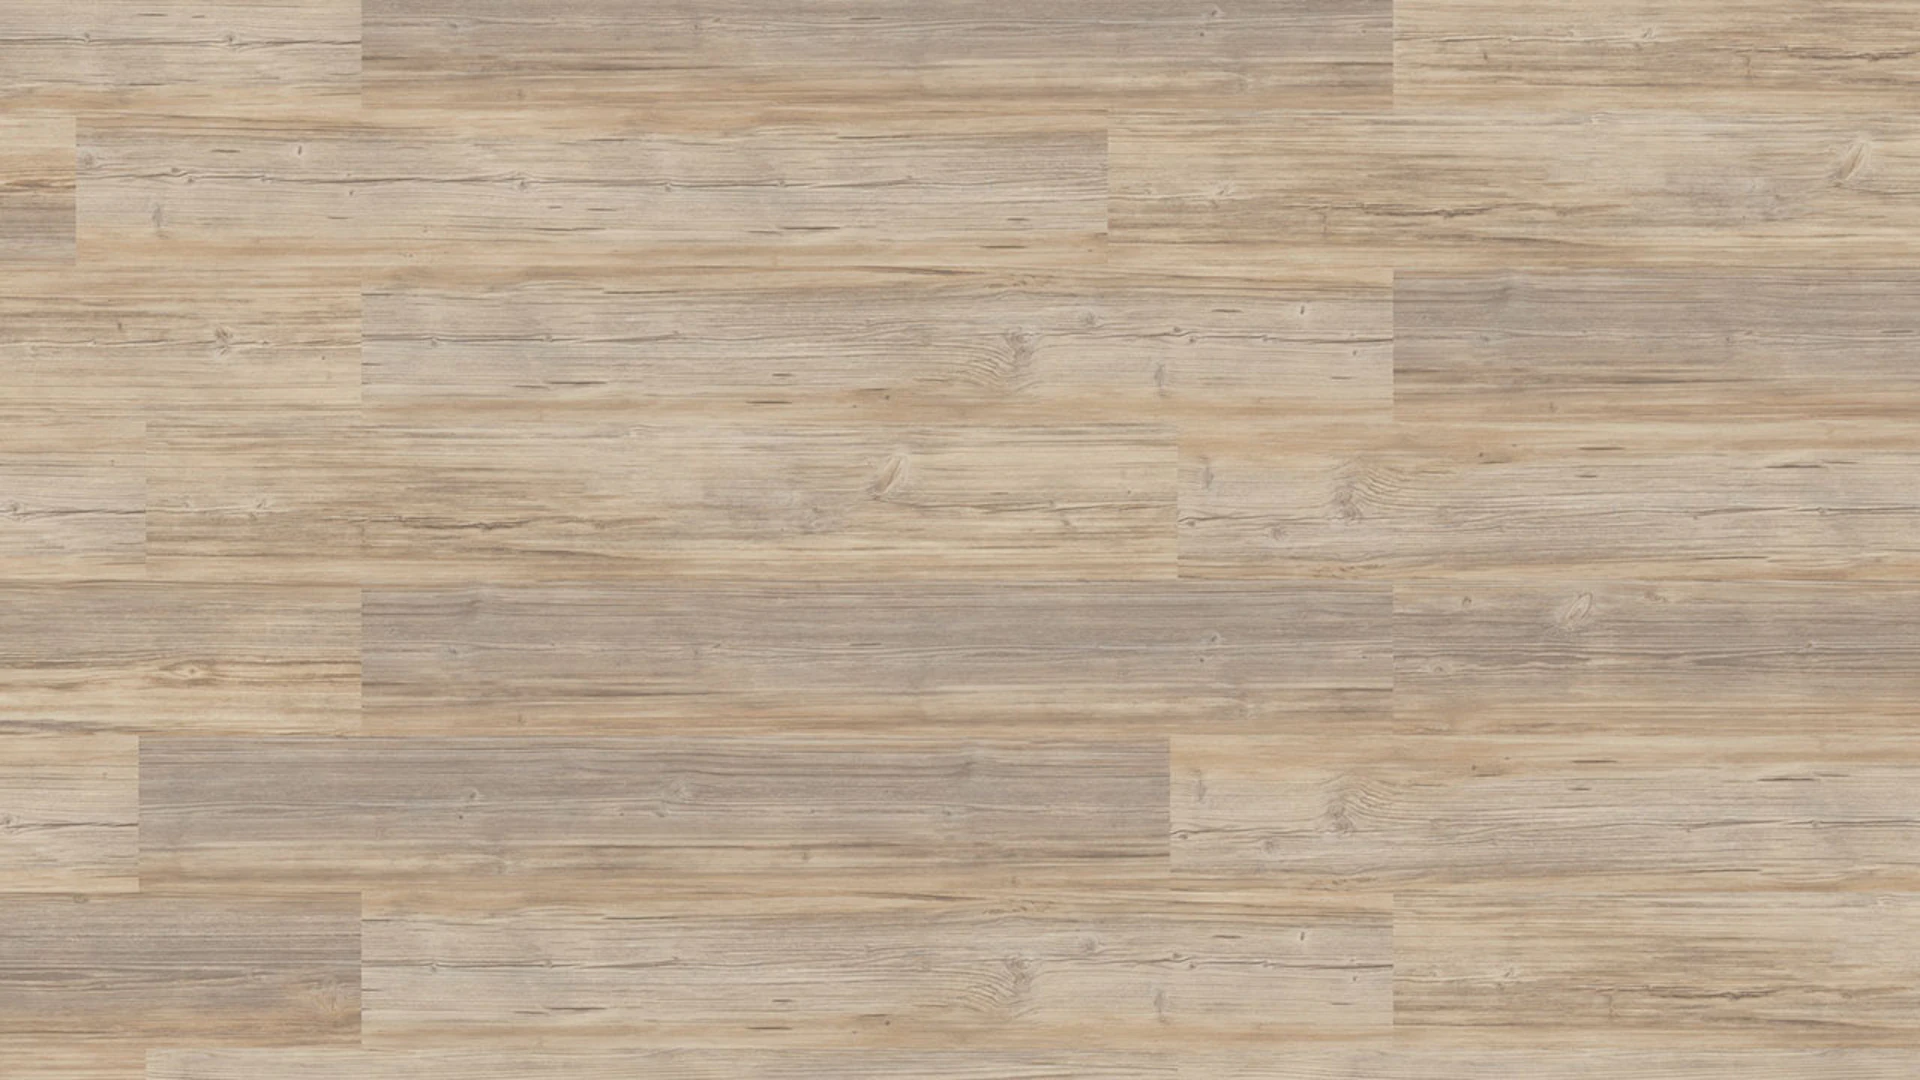 Wicanders Multilayer Vinyl - wood Go Larch Old White (LJW6001)